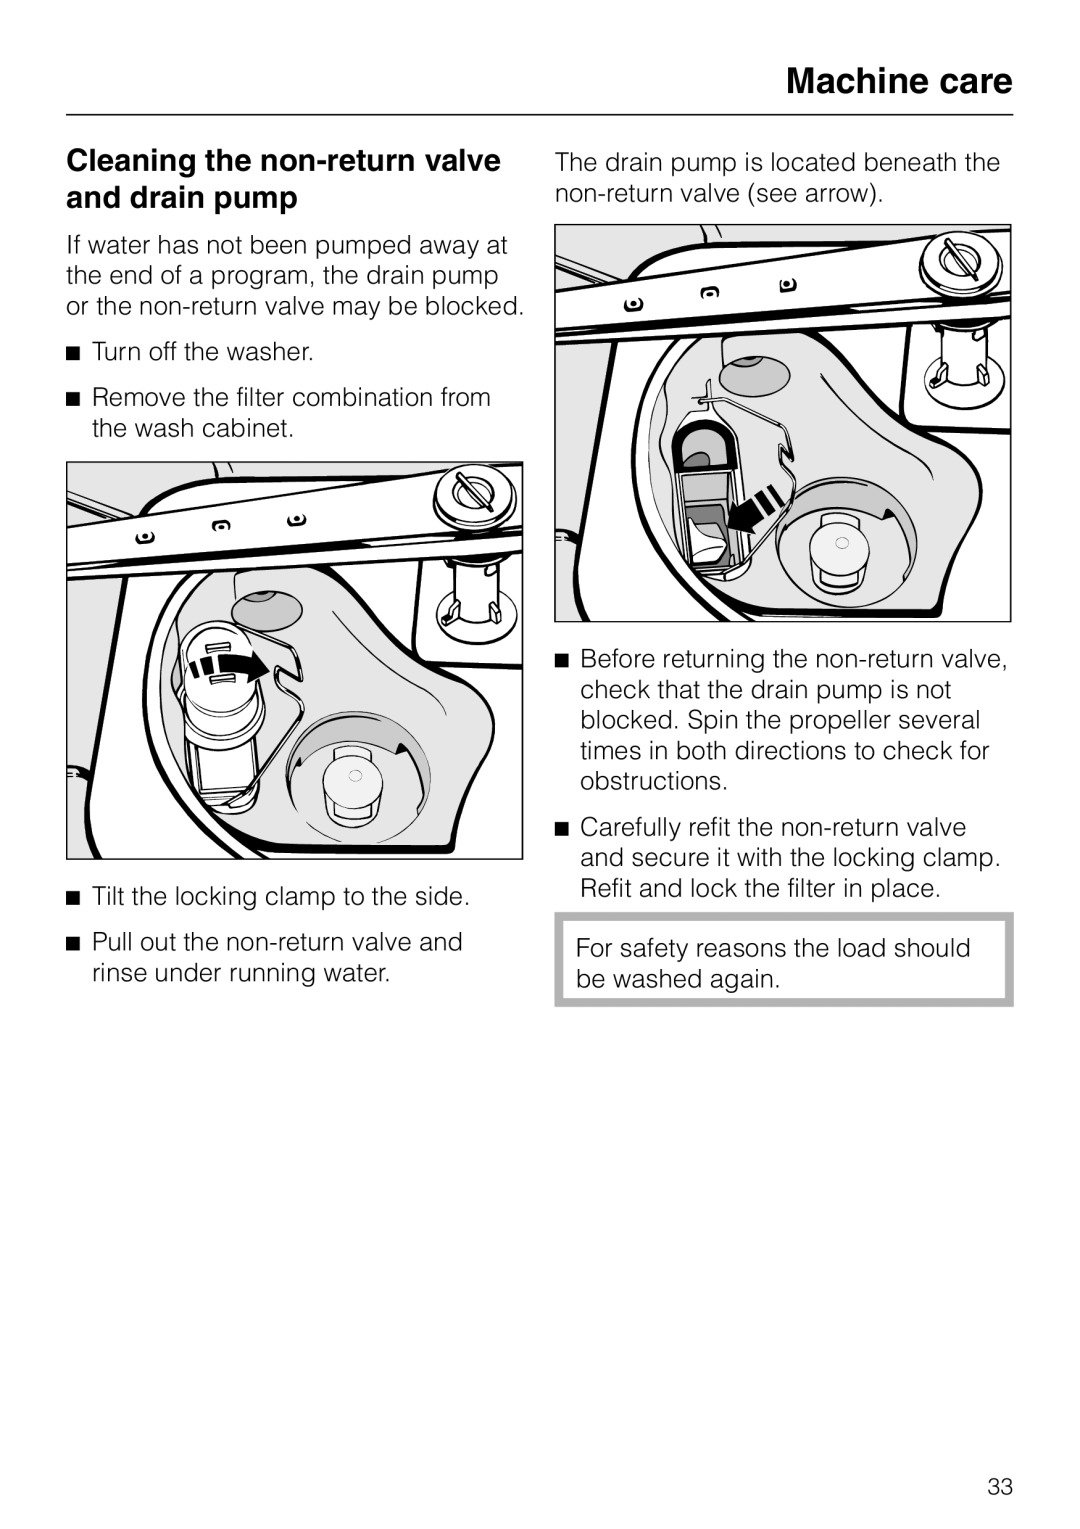 Miele G 7804 manual Cleaning the non-returnvalve and drain pump, Machine care 